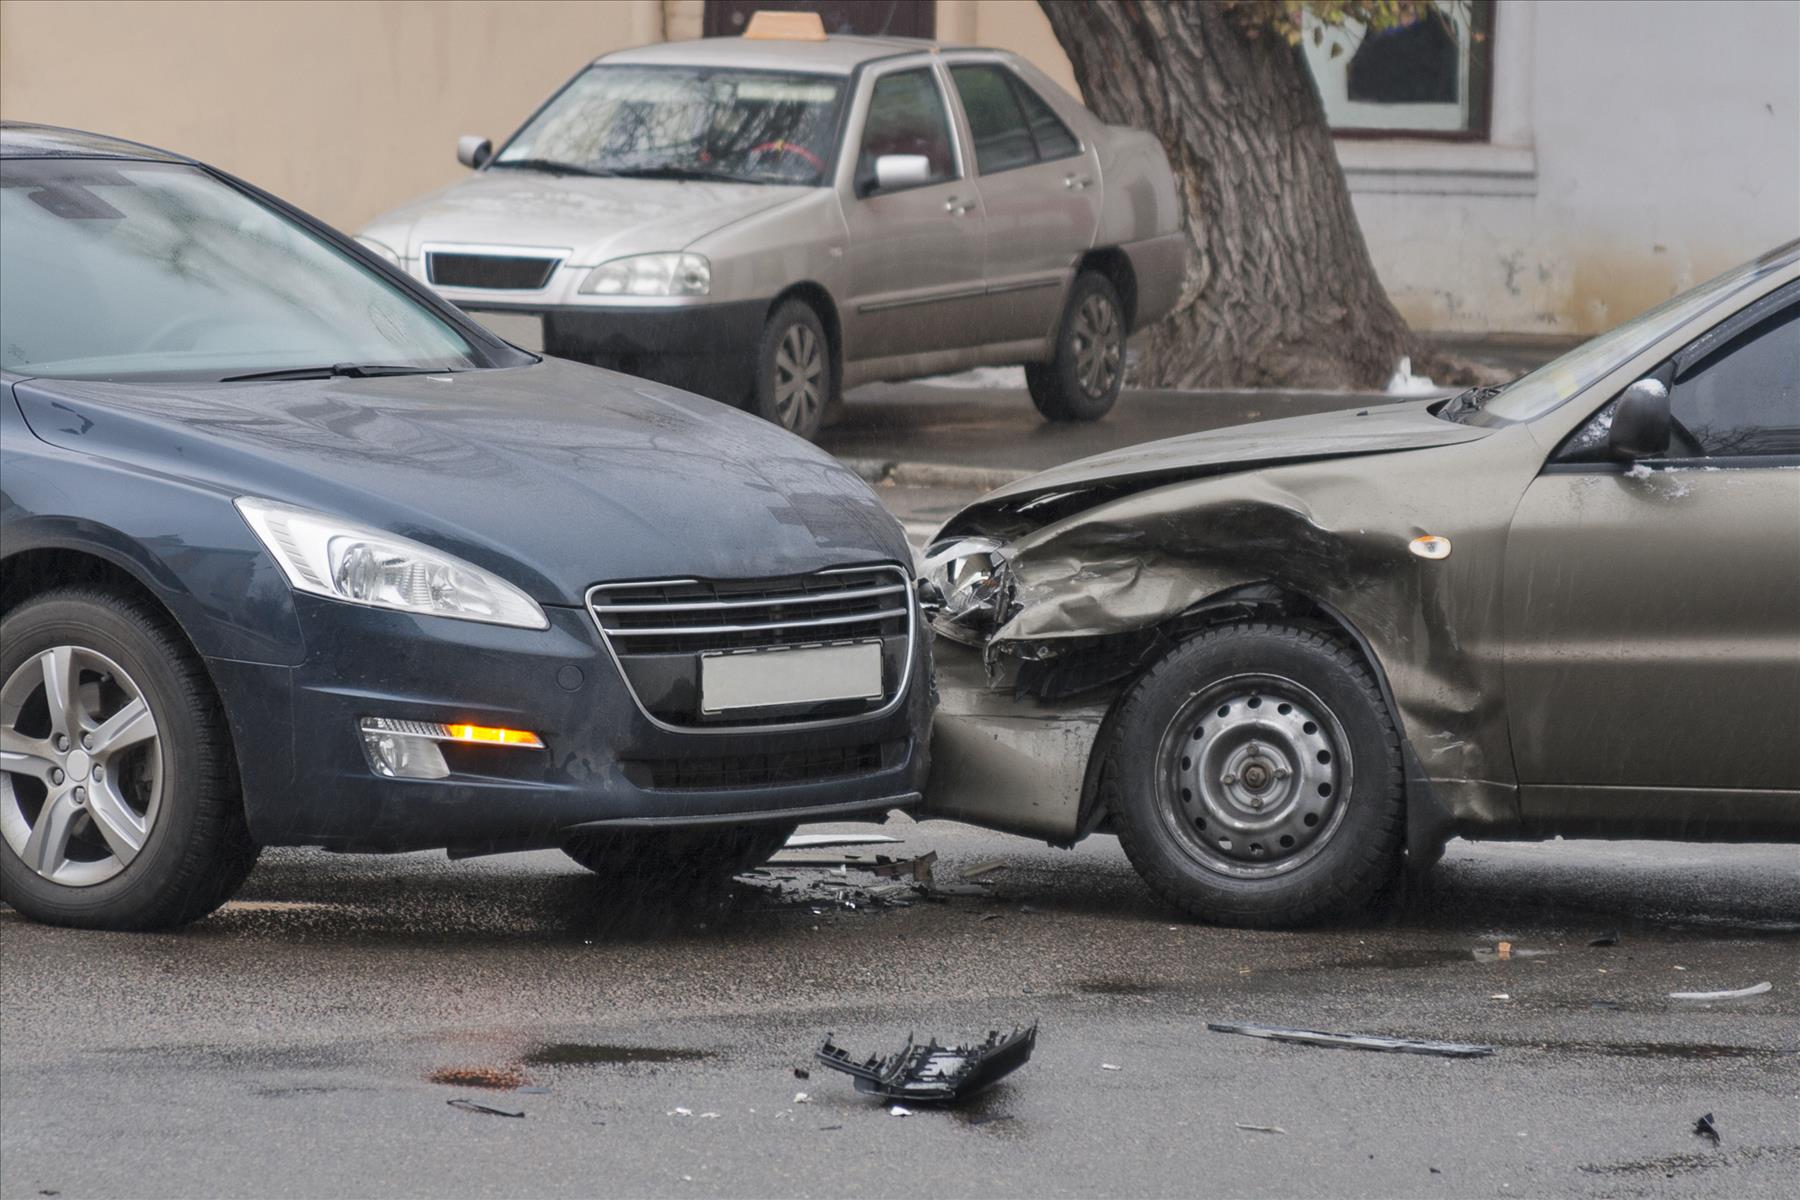 Looking for a Personal Injury Lawyer in Mississauga after a City Crash Occurs